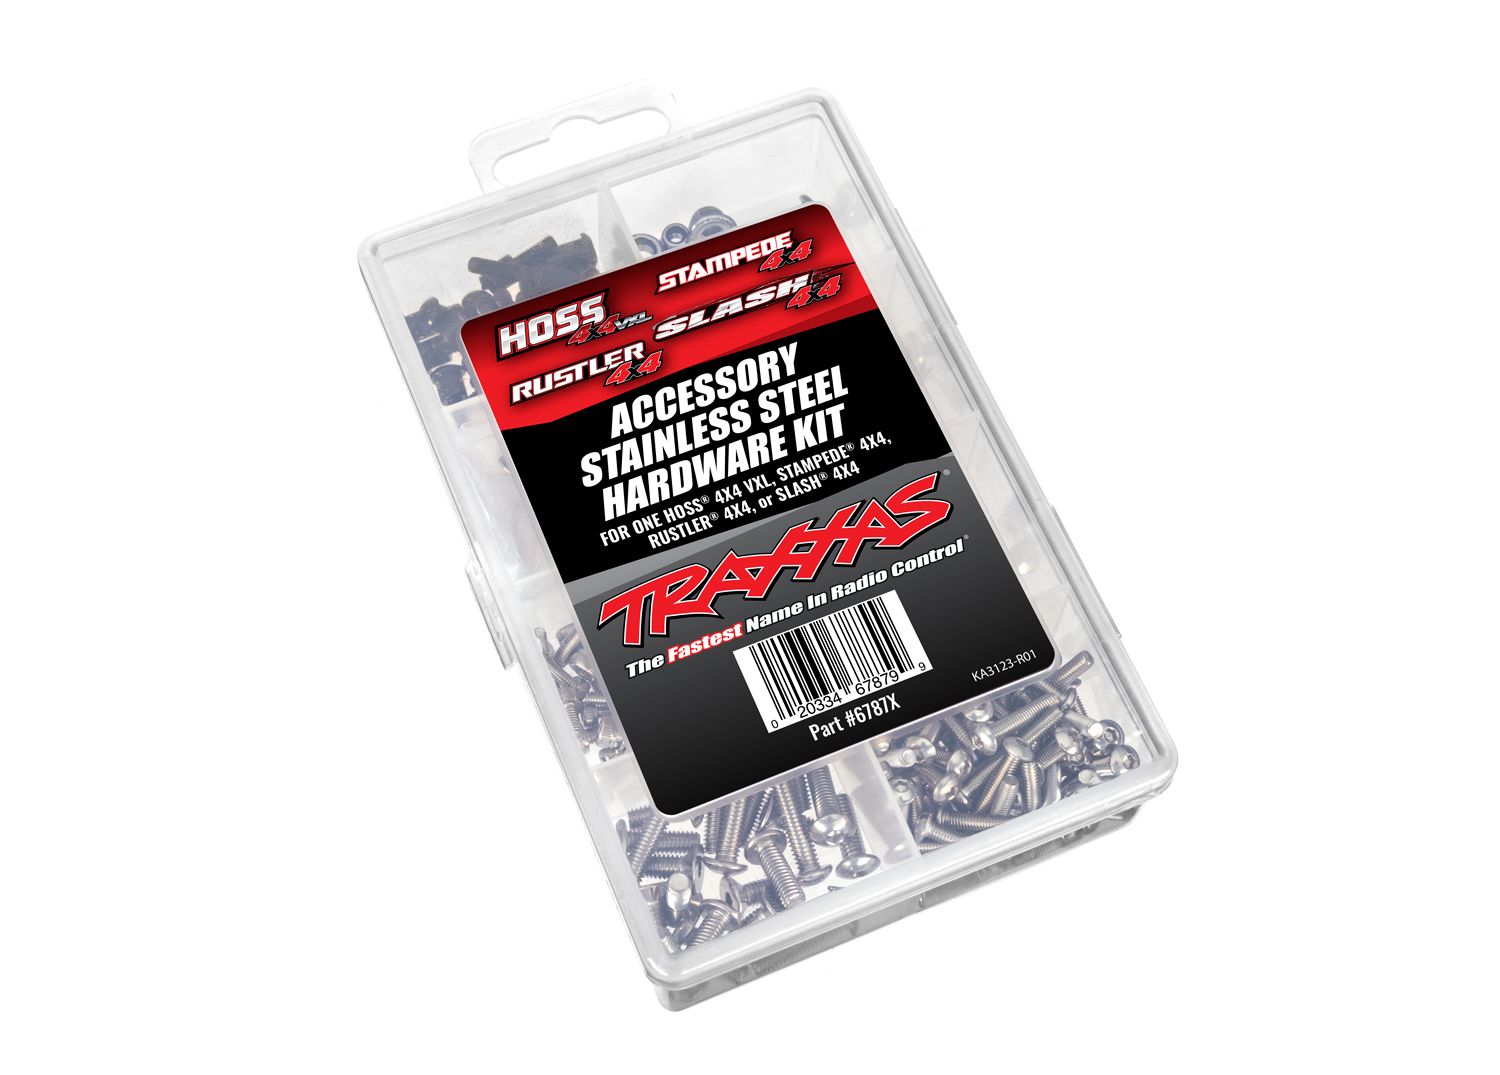 TRAXXAS 6787X Hardware kit, stainless steel, Hoss® 4X4 VXL/Slash® 4X4/Stampede® 4X4/Rustler® 4X4 (contains all stainless steel hardware used on Hoss® 4X4 VXL, Slash® 4X4, Stampede® 4X4, or Rustler® 4X4)